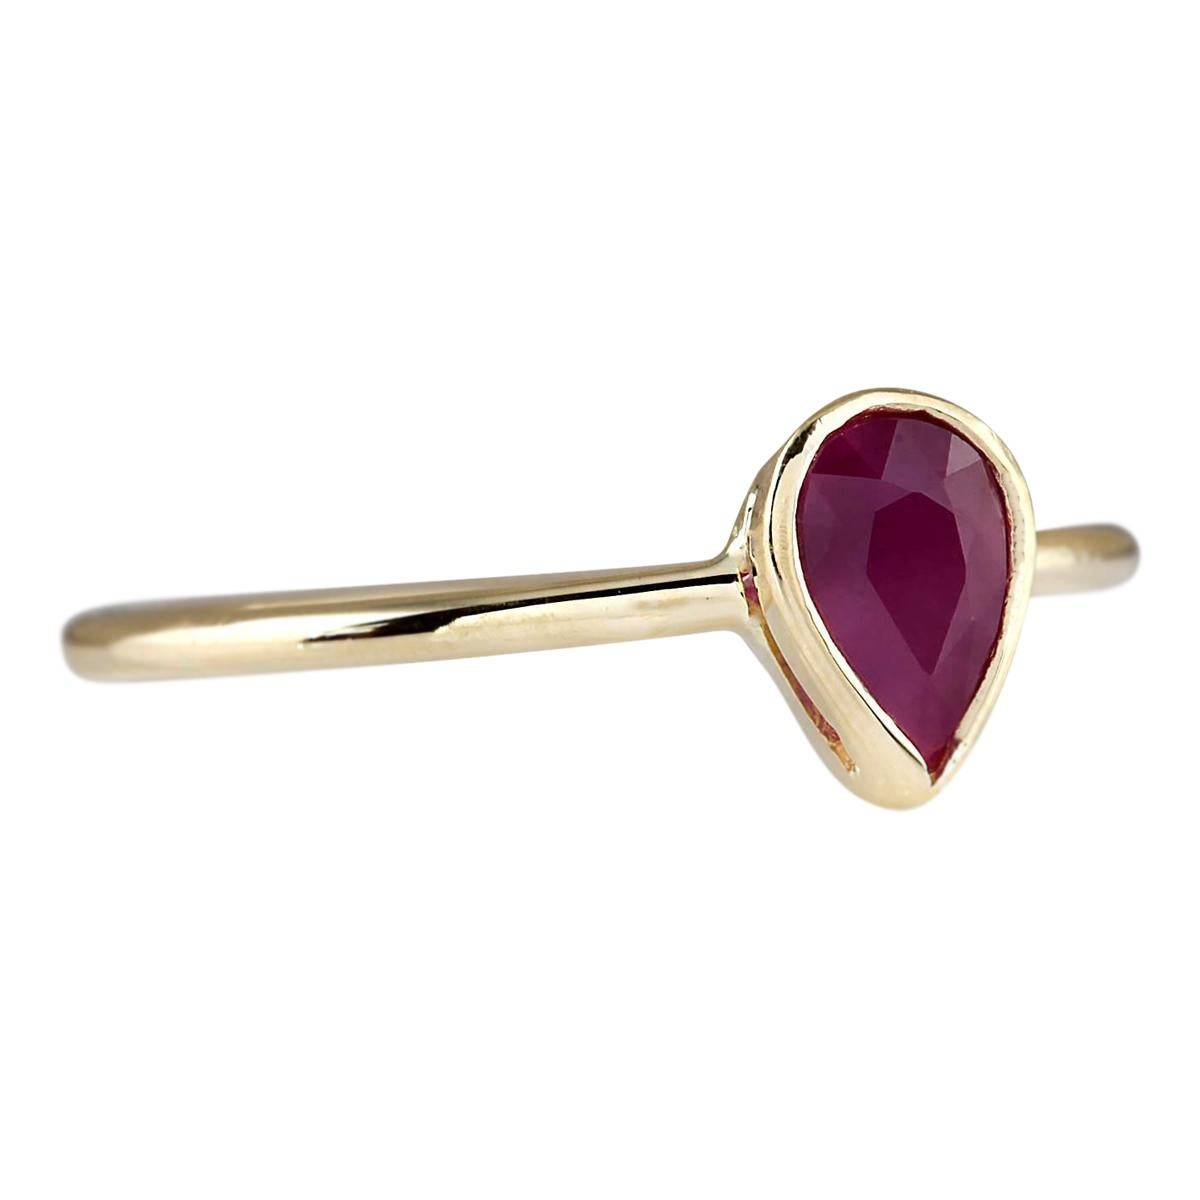 Stamped: 14K Yellow Gold
Total Ring Weight: 1.2 Grams
Total Natural Ruby Weight is 0.60 Carat
Color: Red
Face Measures: 6.00x4.00 mm
Sku: [703395W]